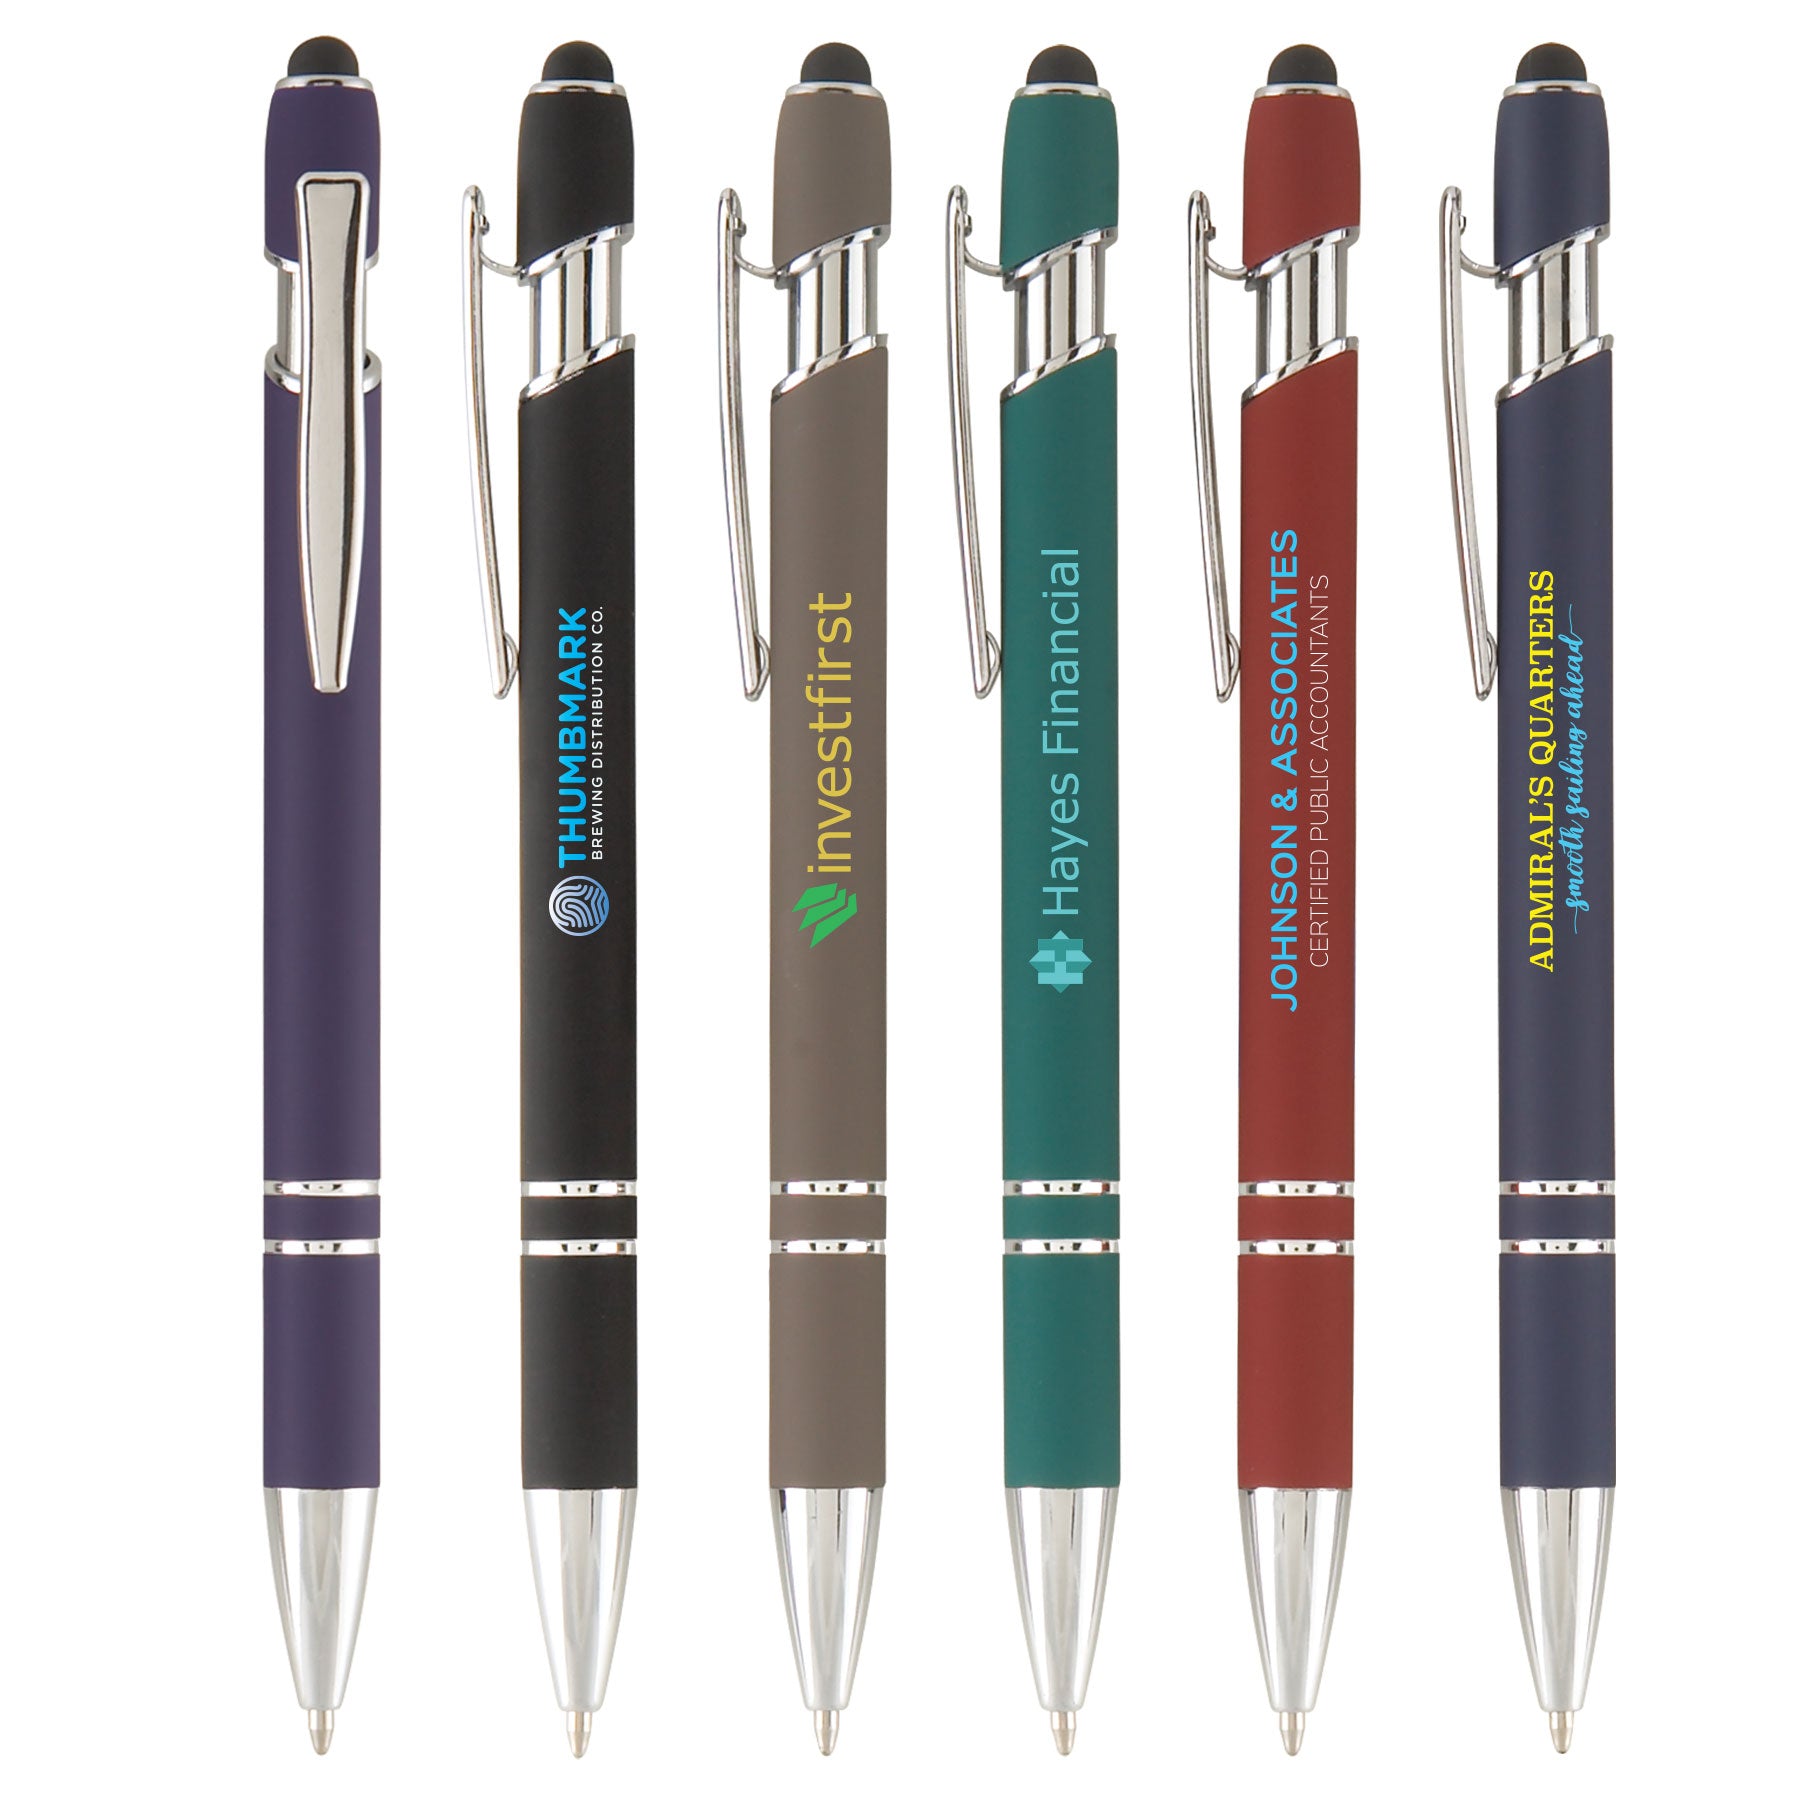 Retractable Metal Pen with Stylus